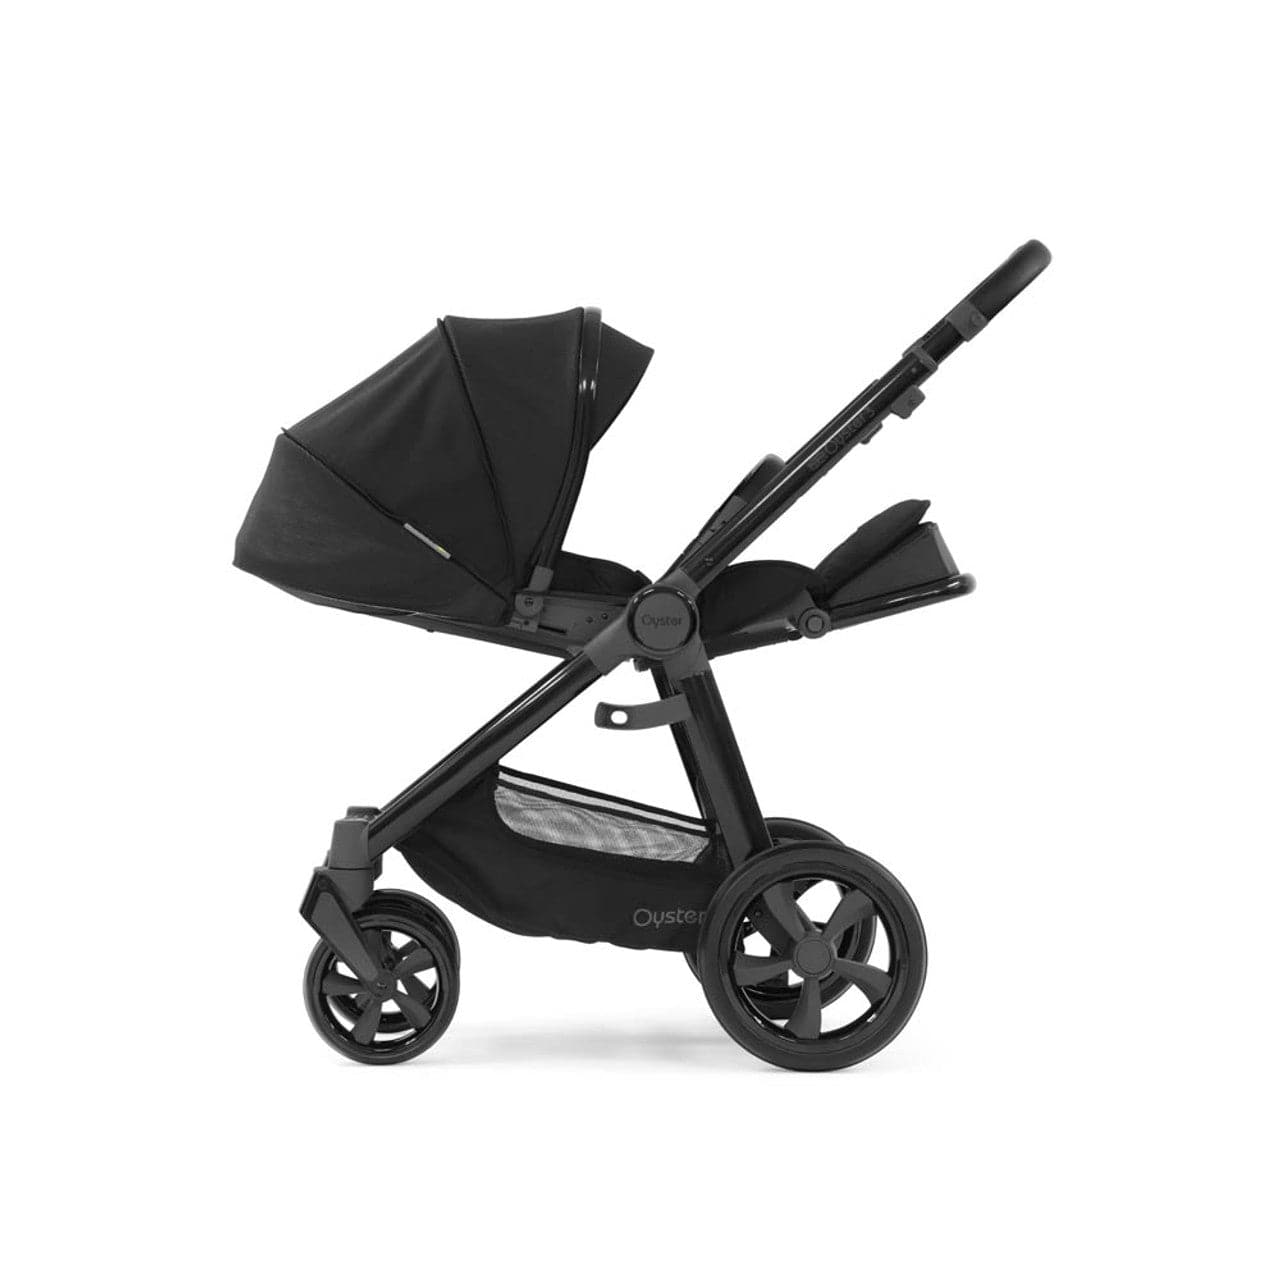 Babystyle Oyster 3 Essential 5 Piece Travel System Bundle - Pixel -  | For Your Little One